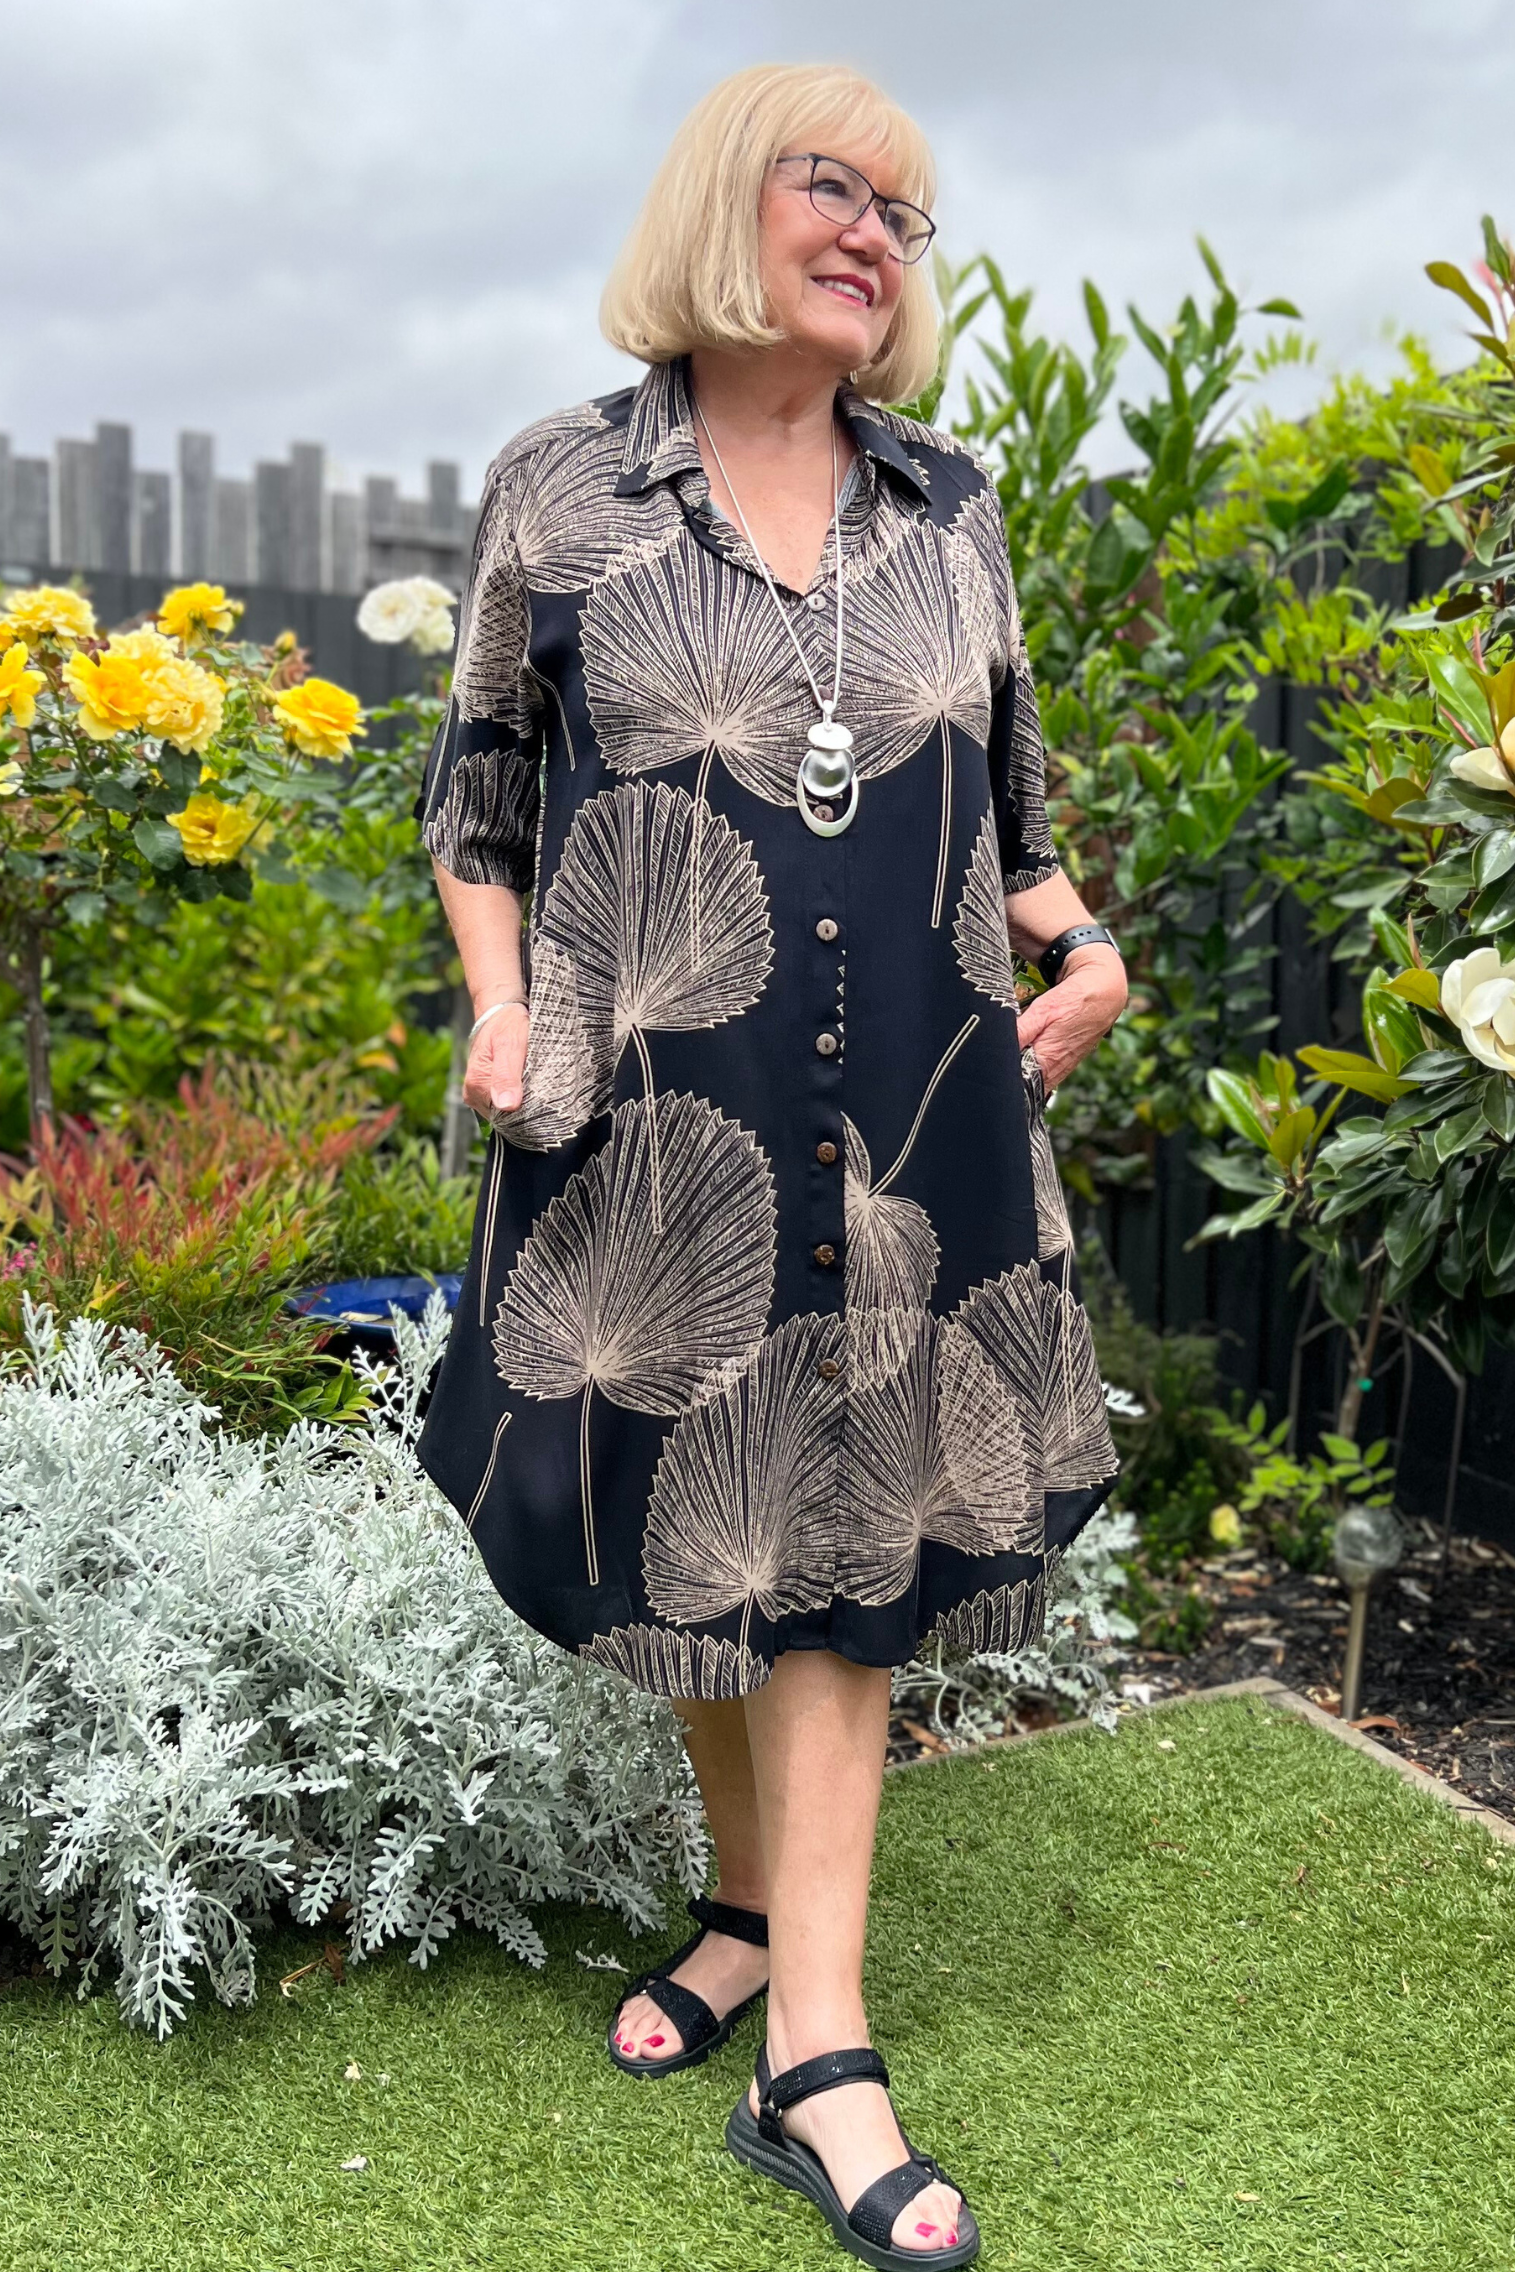 kita ku model in the shirt style dress pronto in a paolo print of fan black and mocha palm leaf set in a sunny garden. 